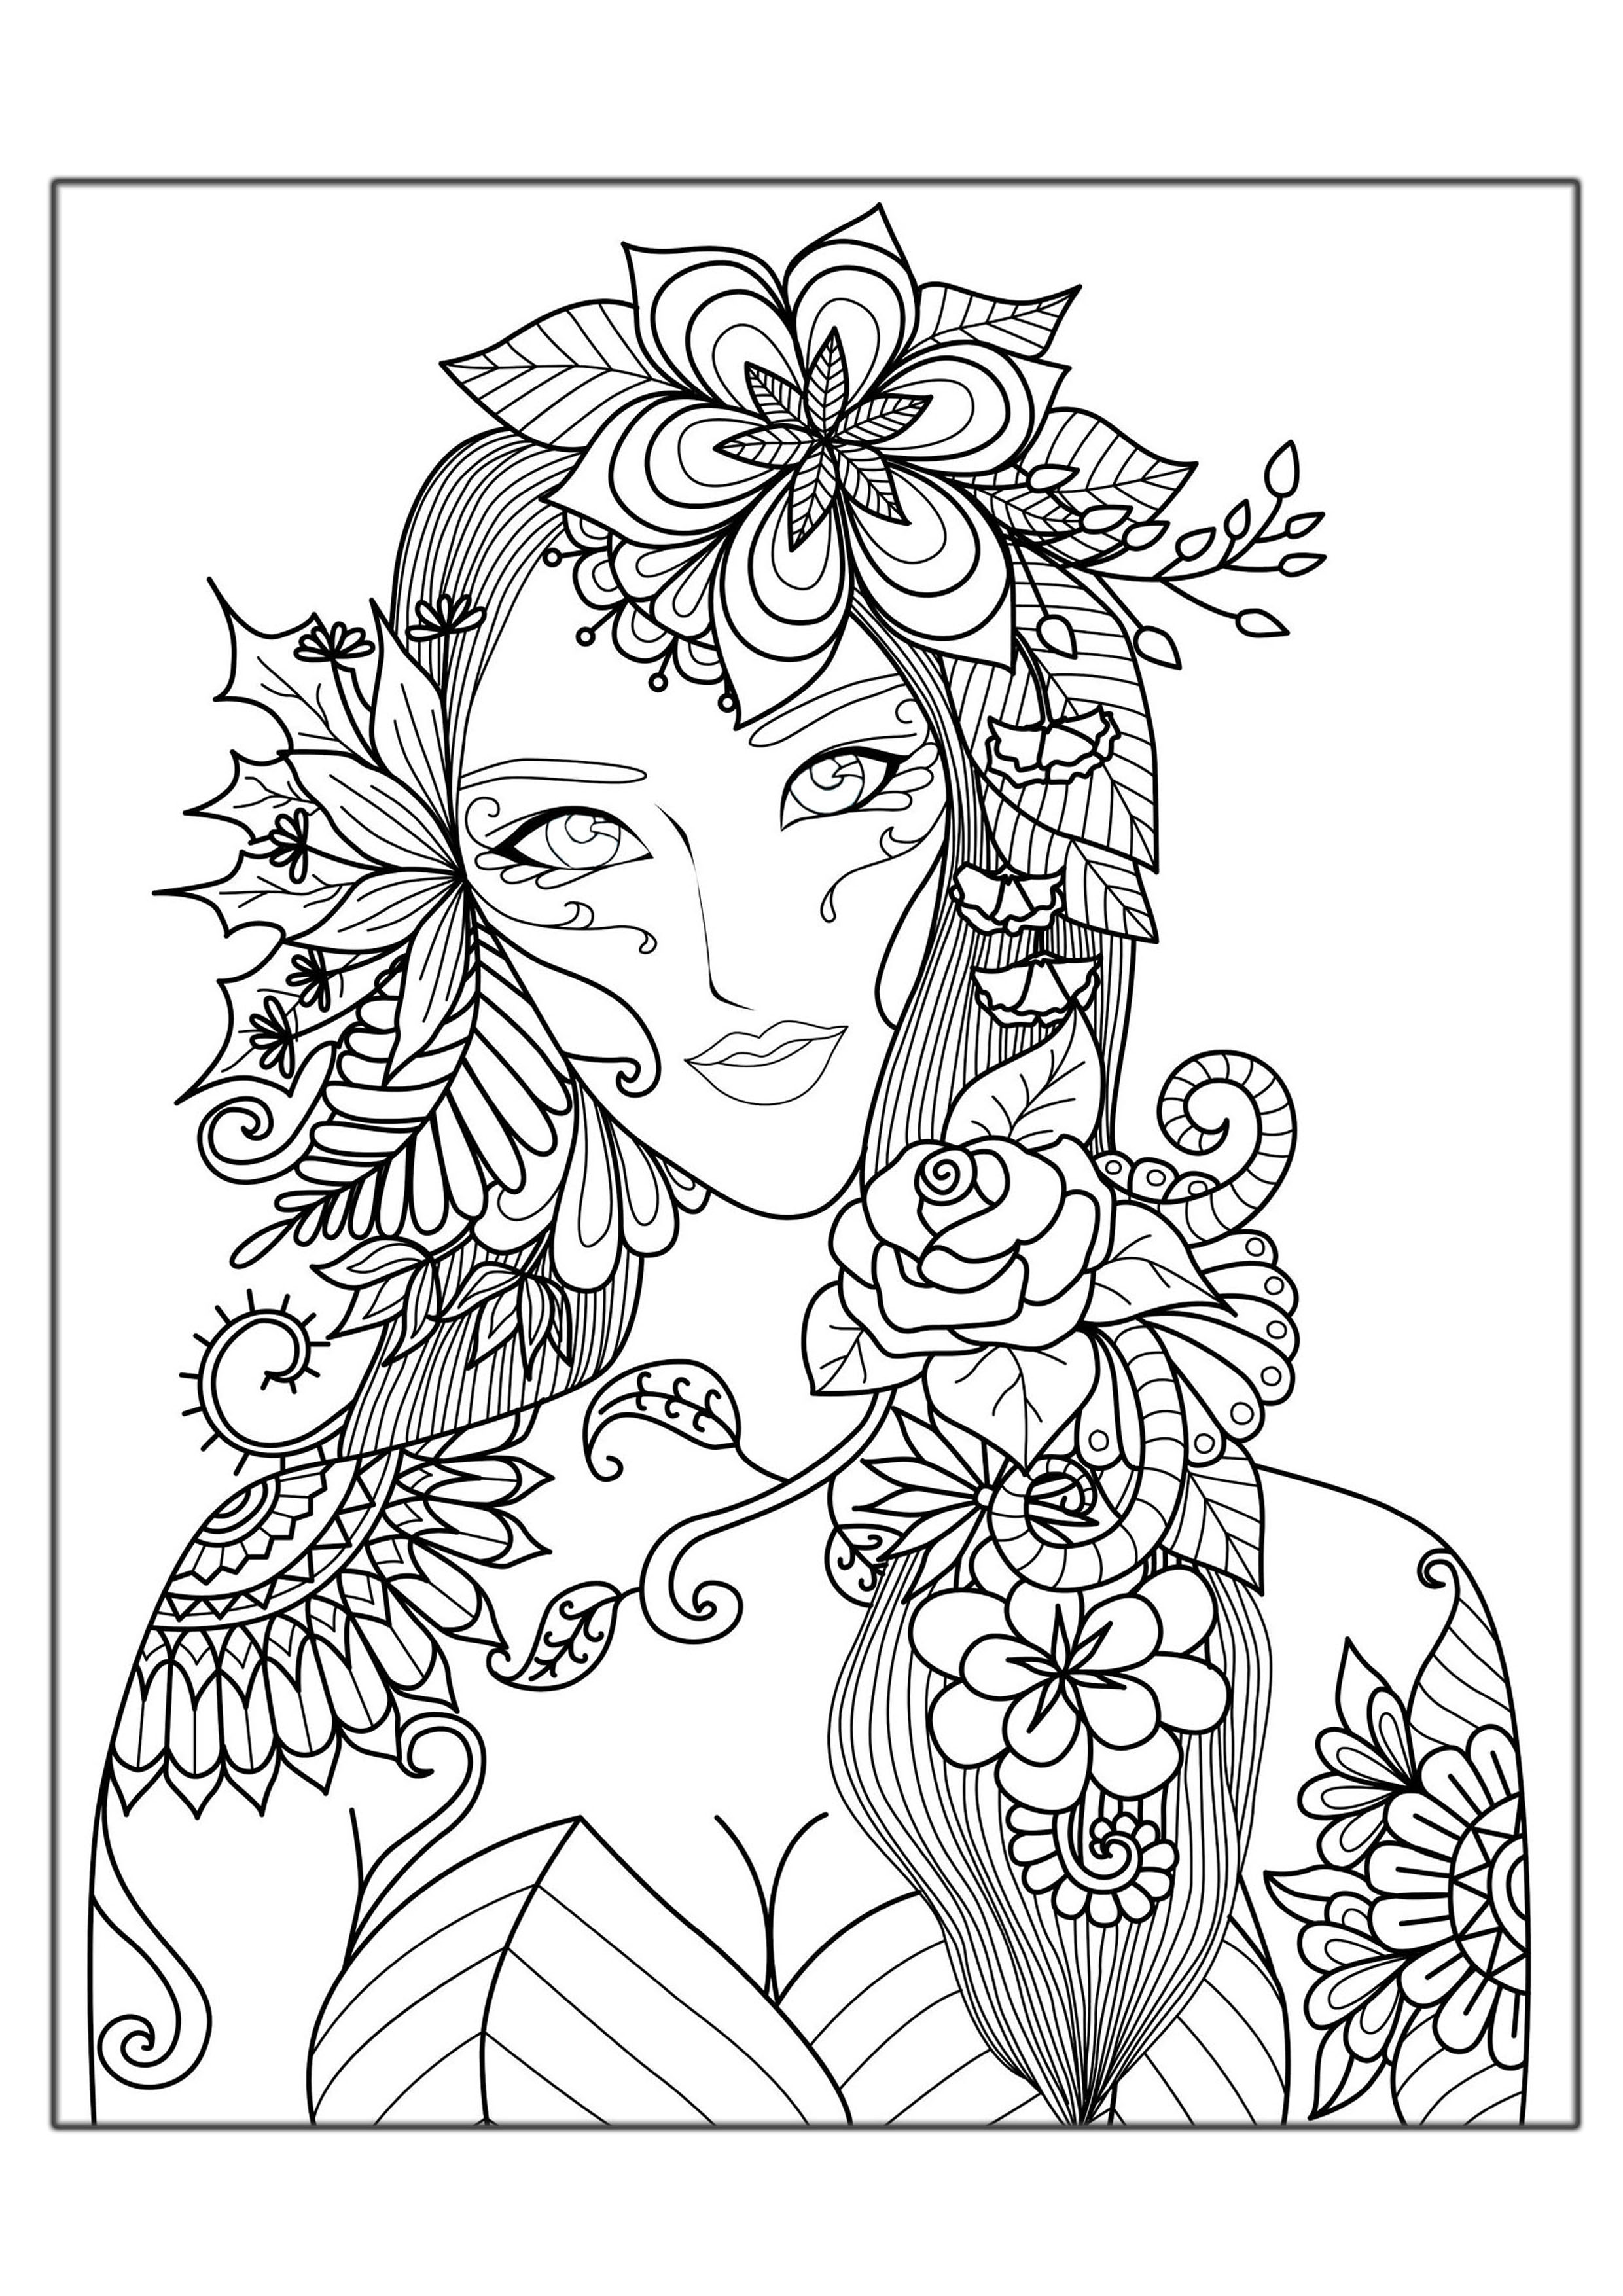 Download Woman flowers - Anti stress Adult Coloring Pages